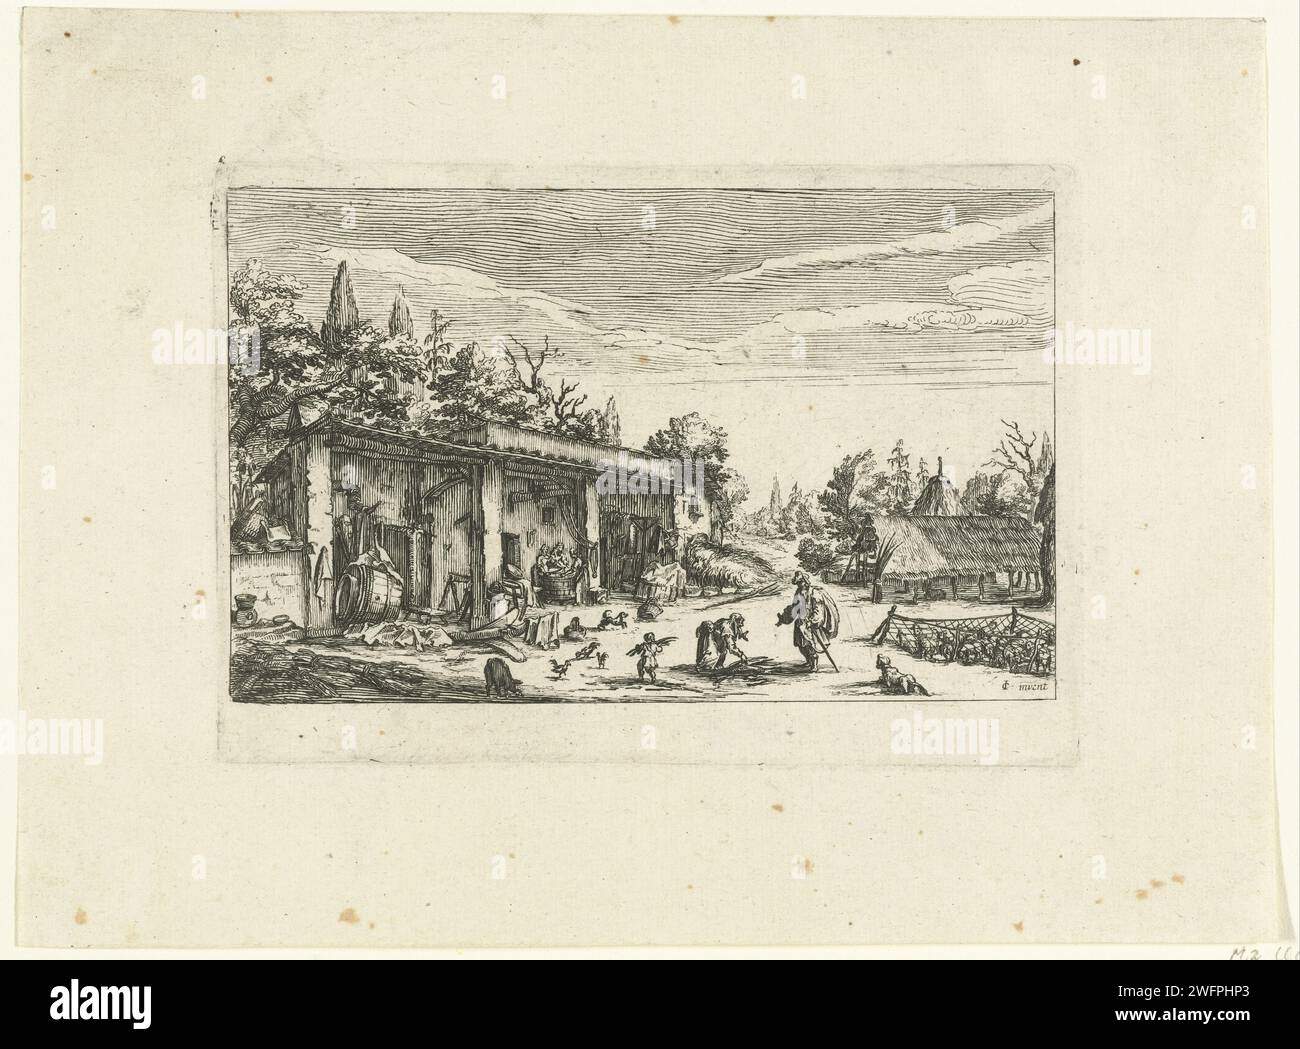 Elias en de Weduwe van Sarepta, François Collignon (Awarded to), after Jacques Callot, 1619 - 1657 print View of a farm yard. On the right is a group of goats within a fence. In the foreground, an old man (Elias) talks to a woman (the widow of Sarepta) while she gathering wood with her son. Three wax women watch. France paper etching when the brook dries up, Elijah crosses over to the city of Zarephath; at the gate he meets a woman and her little son gathering wood (the woman's sticks may form a cross) Stock Photo